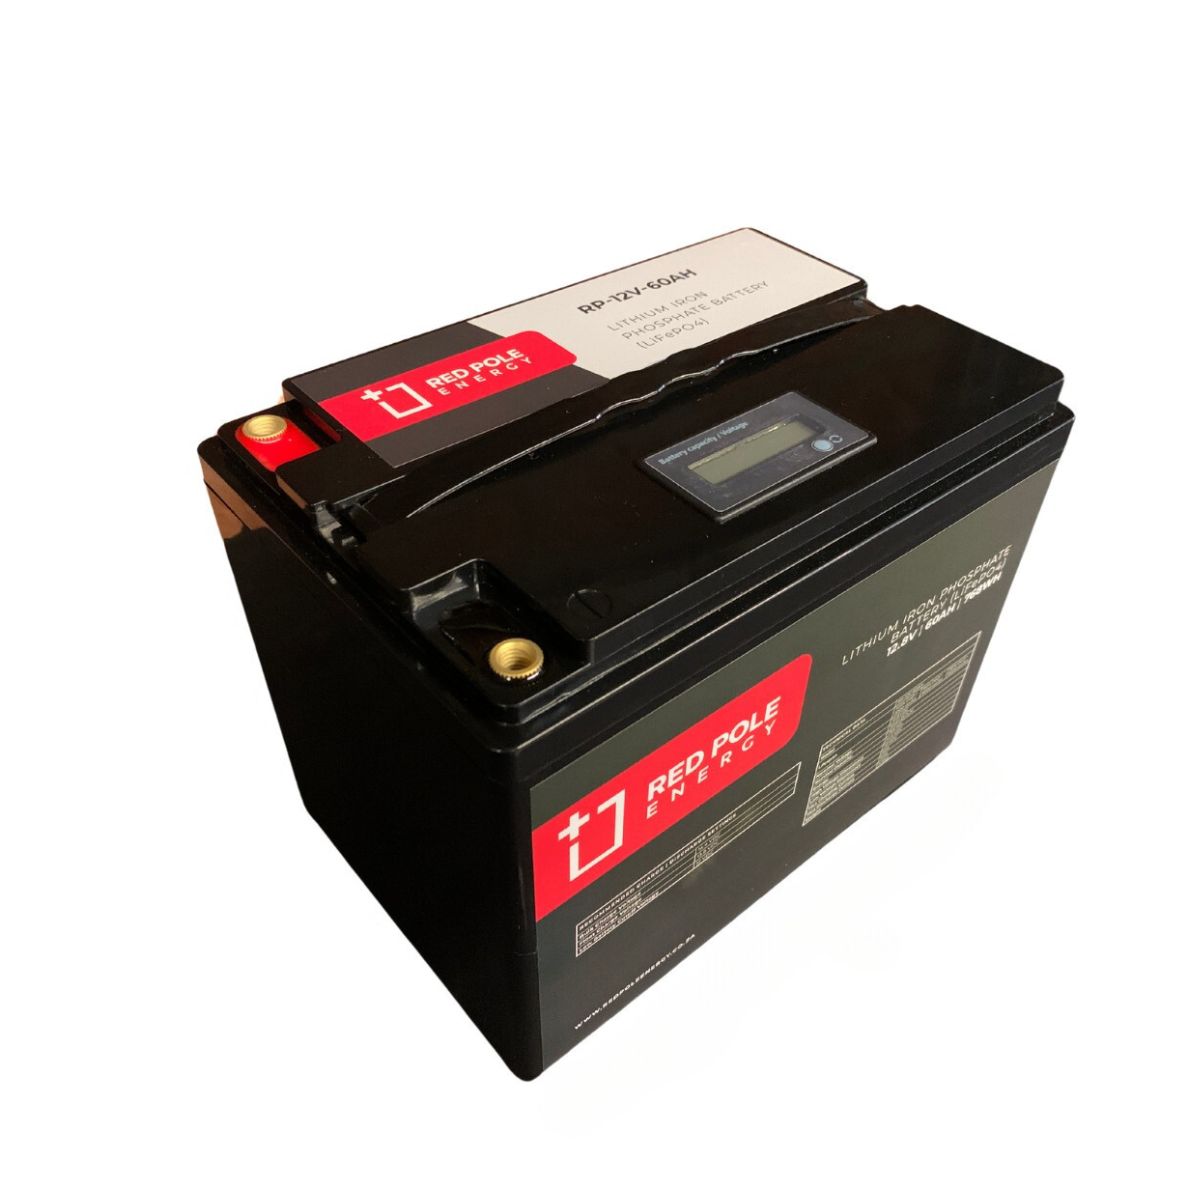 Red Pole Energy 12V 60Ah 768Wh LiFePO4 Battery